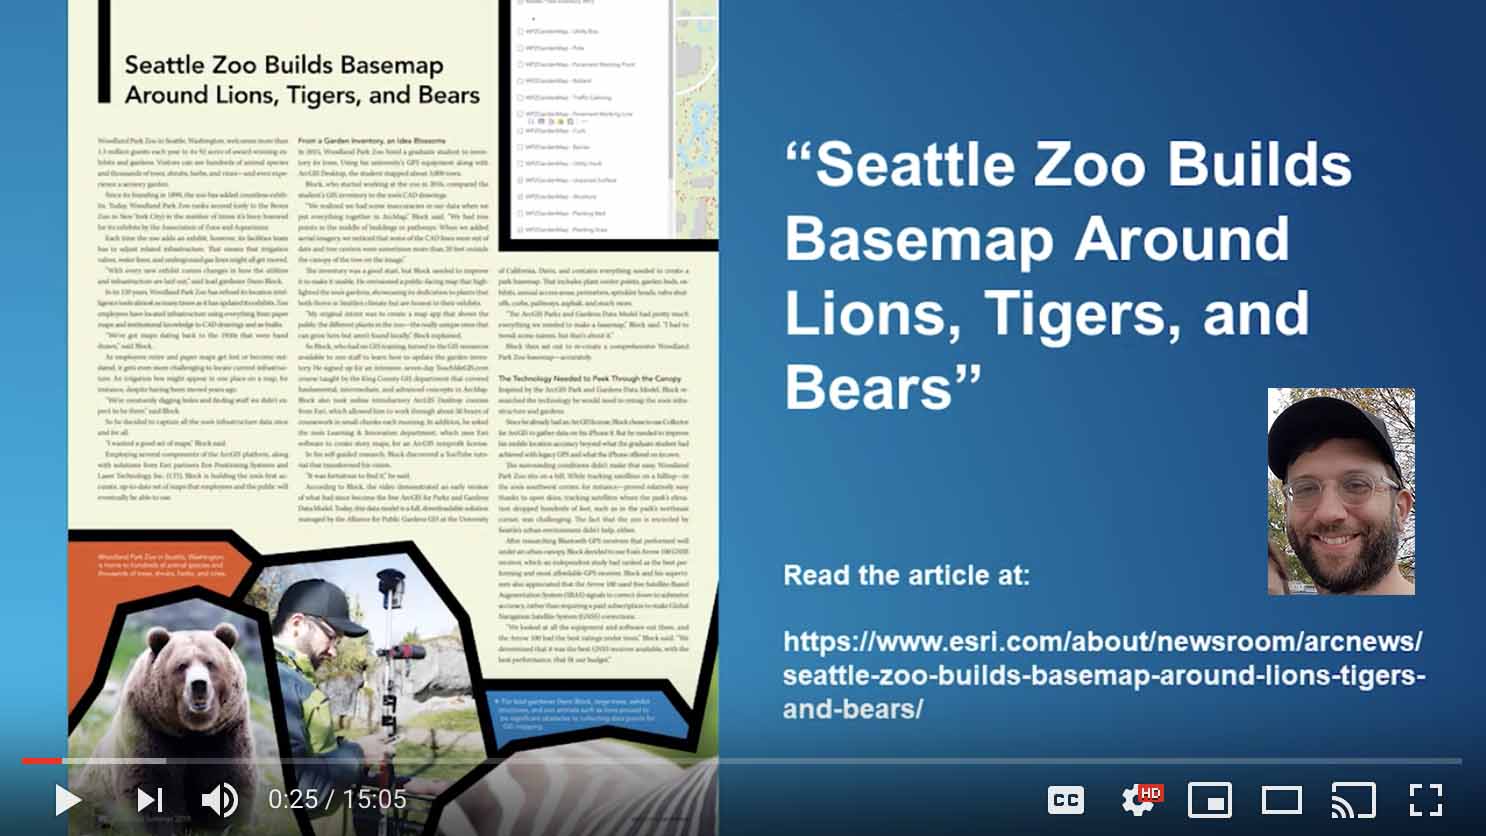 FEATURE IMAGE - VIDEO - CASE STUDY - WOODLAND PARK ZOO